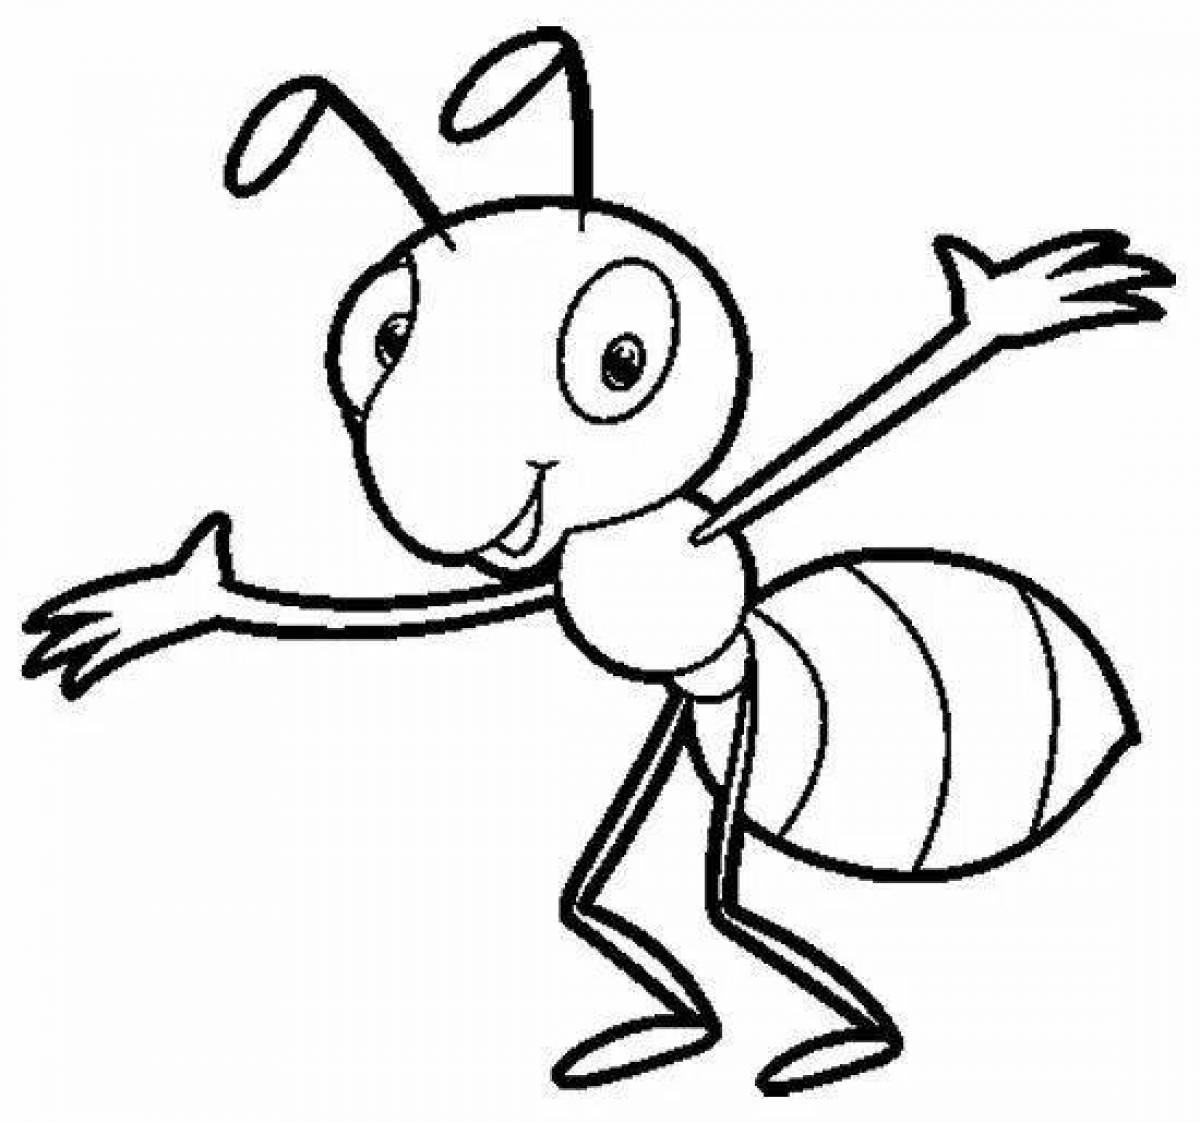 Playful ant coloring page for kids